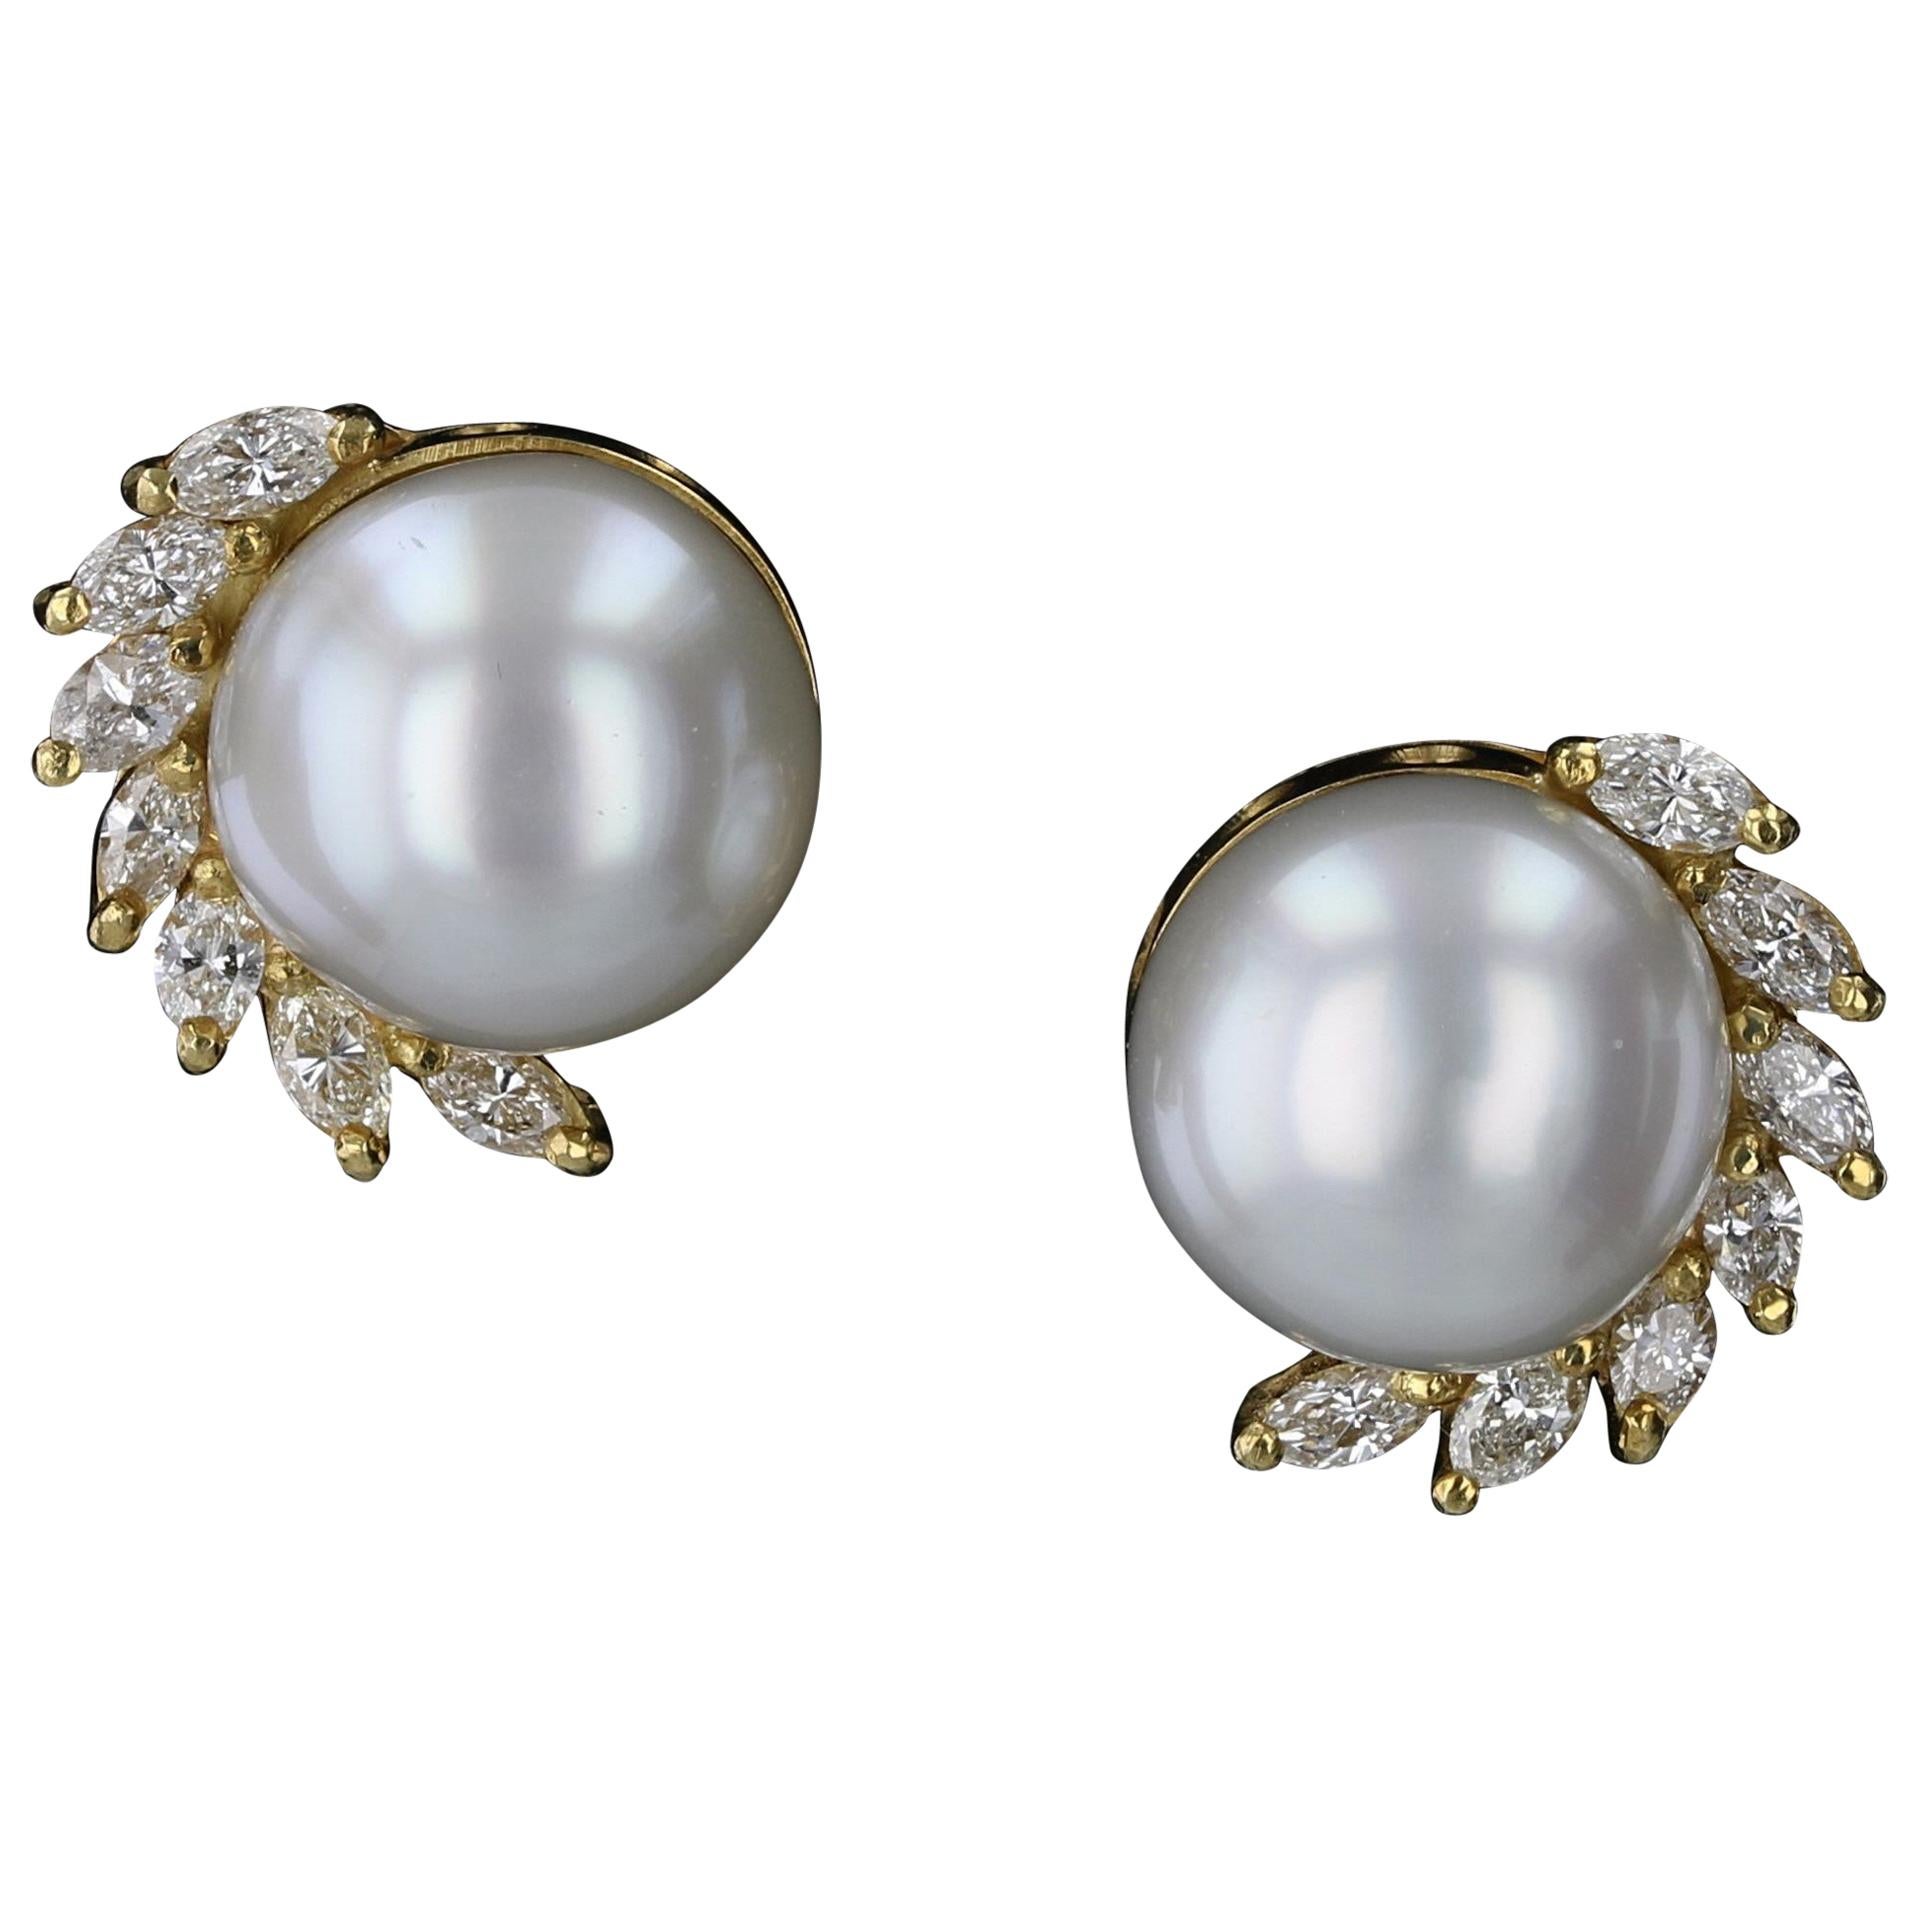 Estate Button Pearl and Marquise Diamond Earrings in 18 Karat Yellow Gold